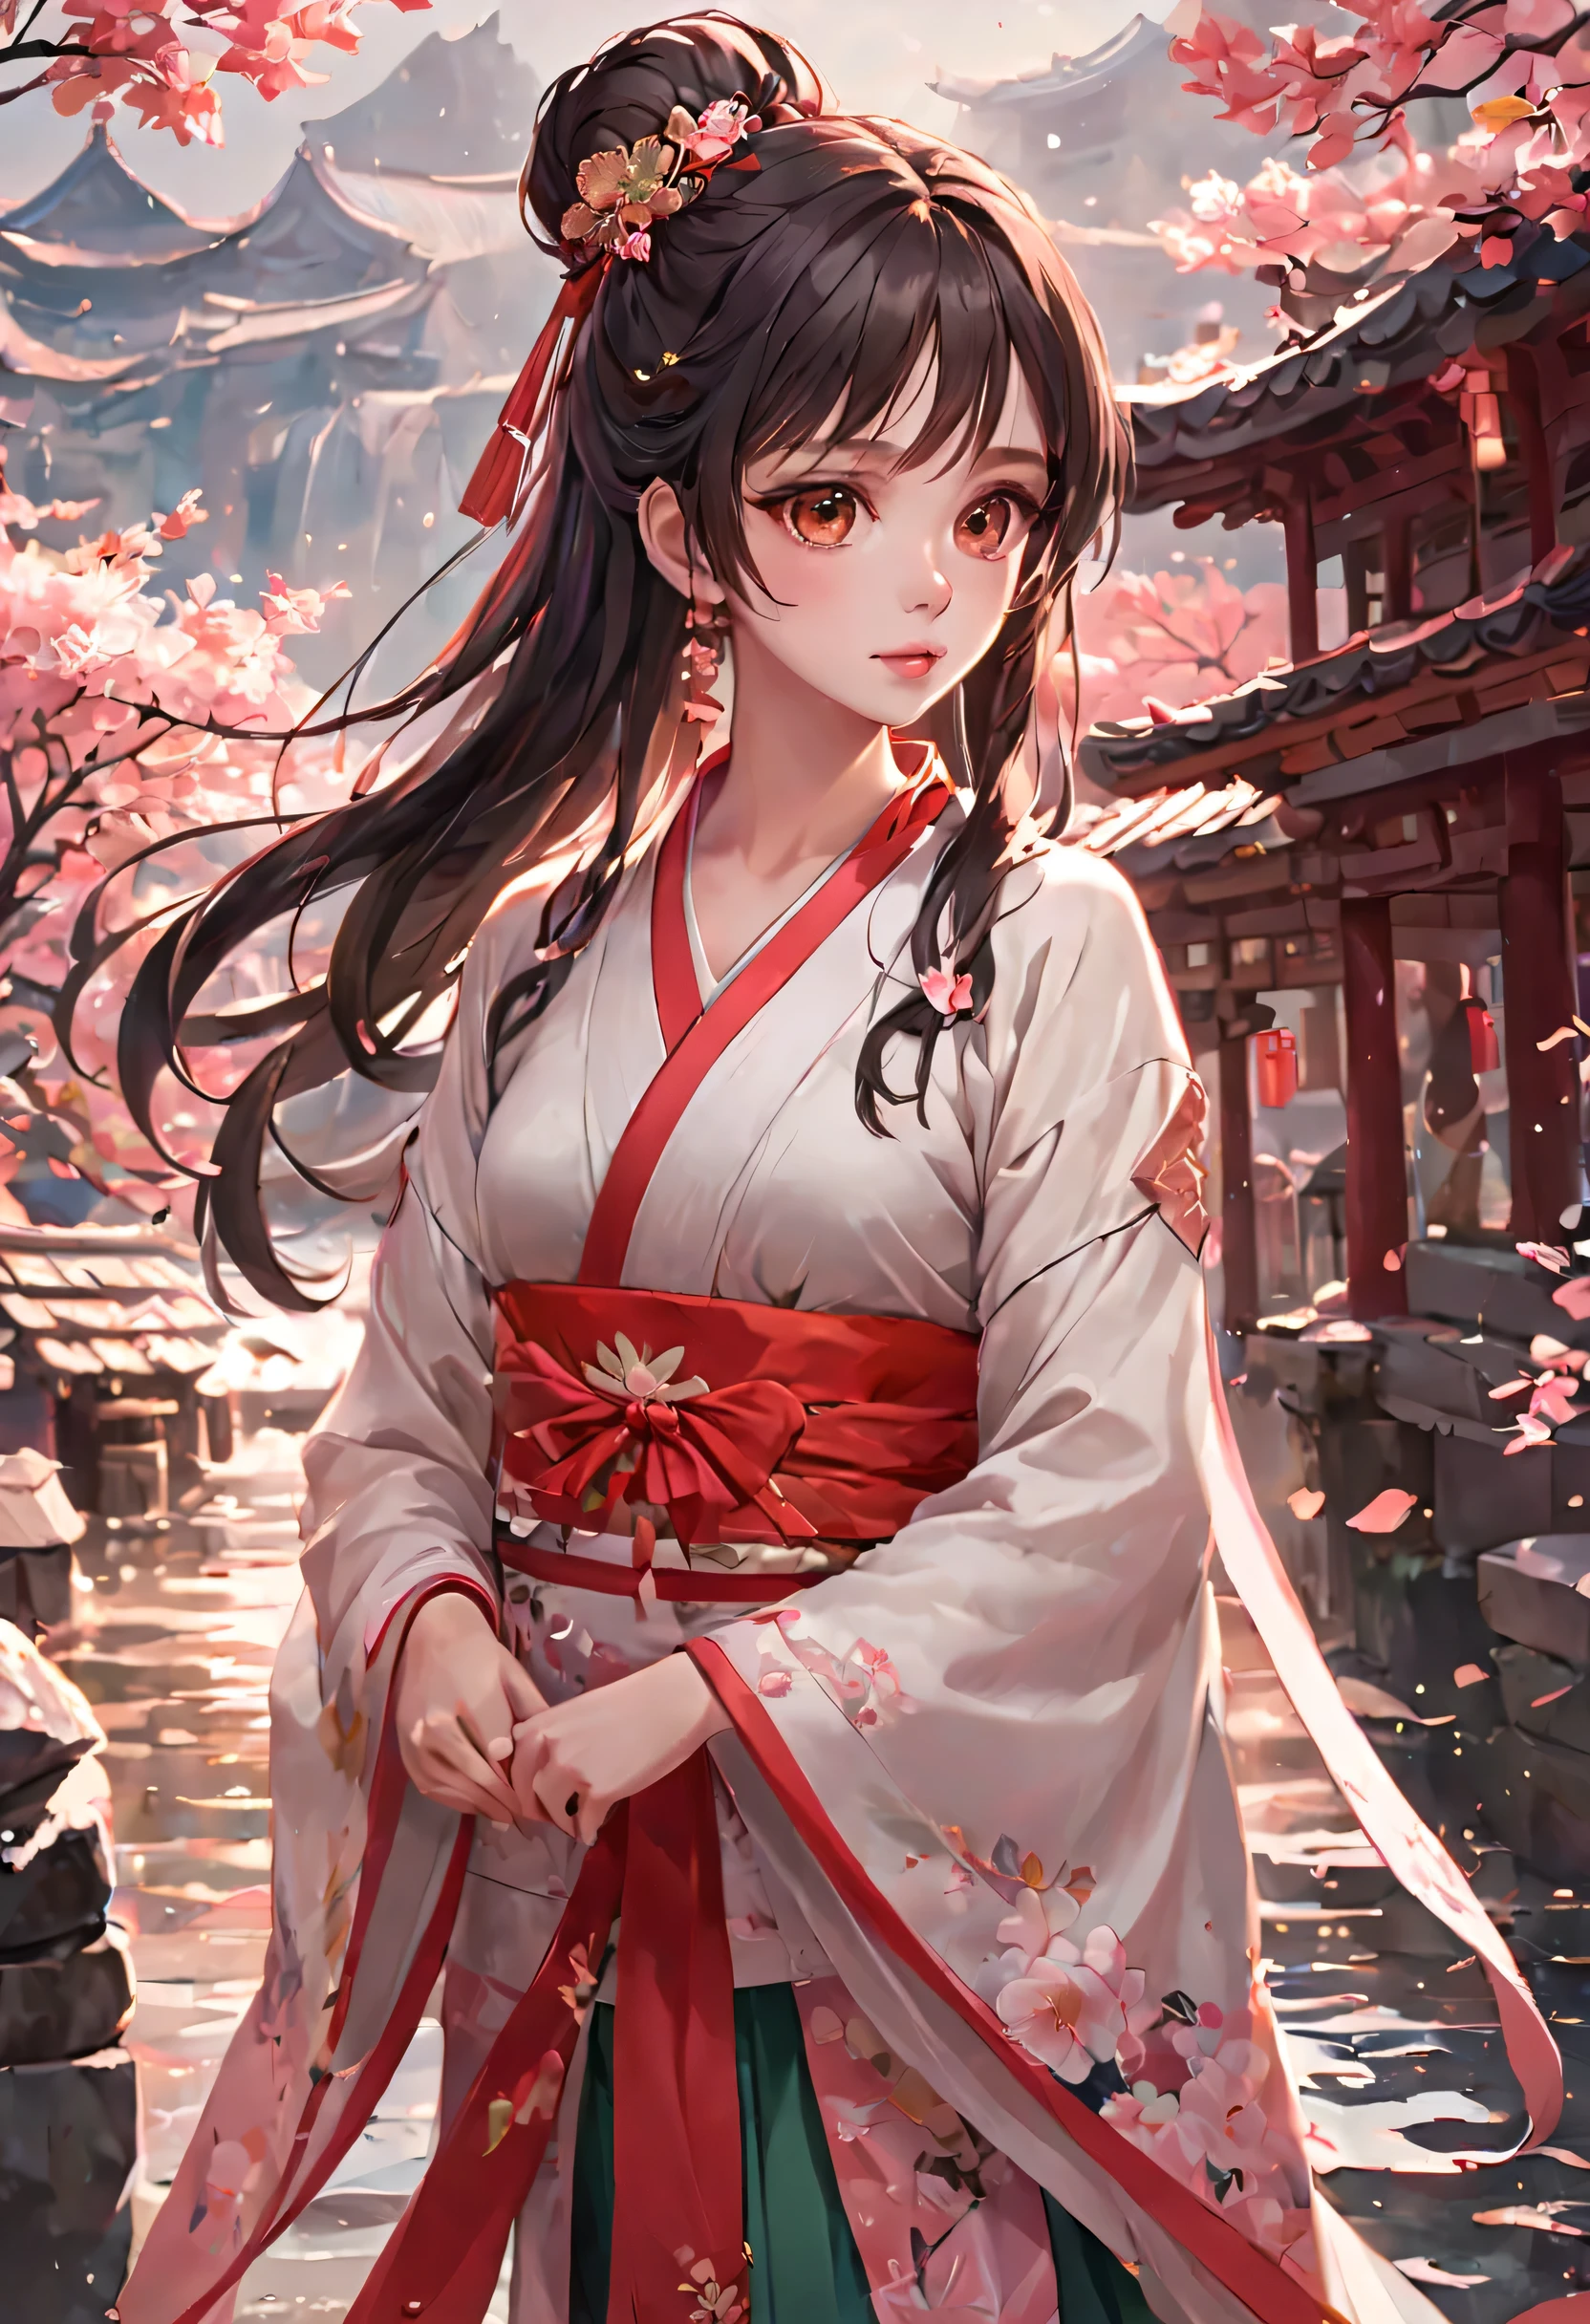 (best quality,masterpiece:1.2),(perfect face:1.5),(Bright Eyes:1.3),Animation scene of a beautiful girl wearing Hanfu walking on a busy street,(Palace and majestic tower atop the waterfall),Taoist,(Detailed Hanfu:1.3),guweiz style artwork, Anime Fantasy Illustration, 2.5d cgi anime fantasy artwork, anime fantasy artwork, anime art wallpaper 4k, anime art wallpaper 4k, anime style 4k, Chinese fantasy, fantasy art style, A beautiful artistic illustration, Anime Fantasy Illustration, beautiful fantasy art